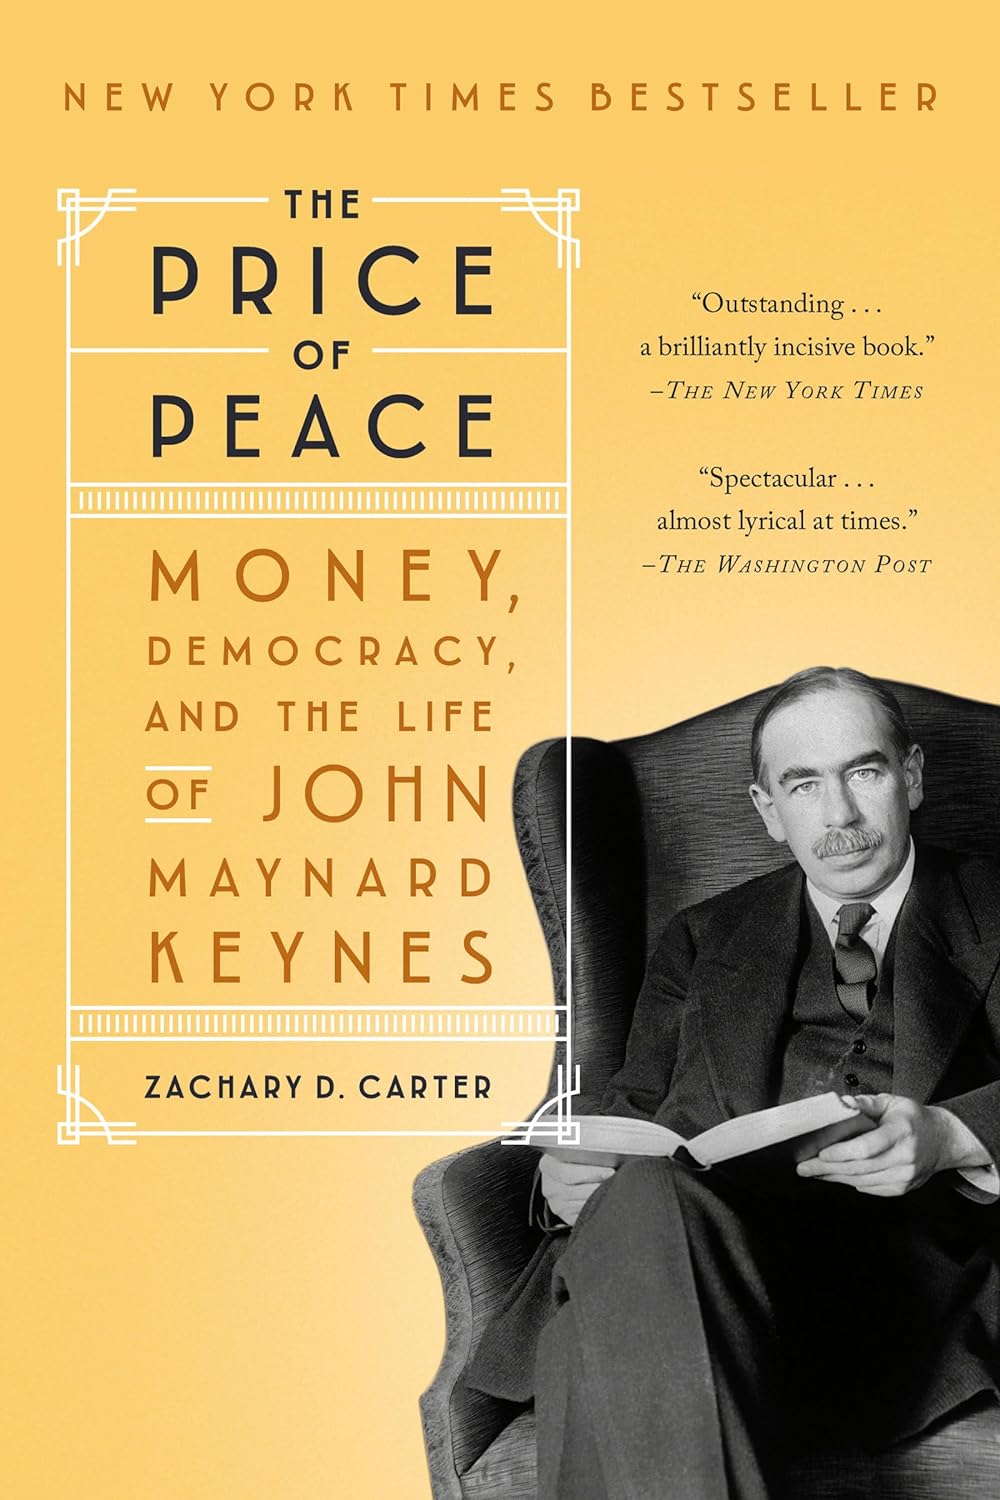 Book cover: "The Price of Peace."